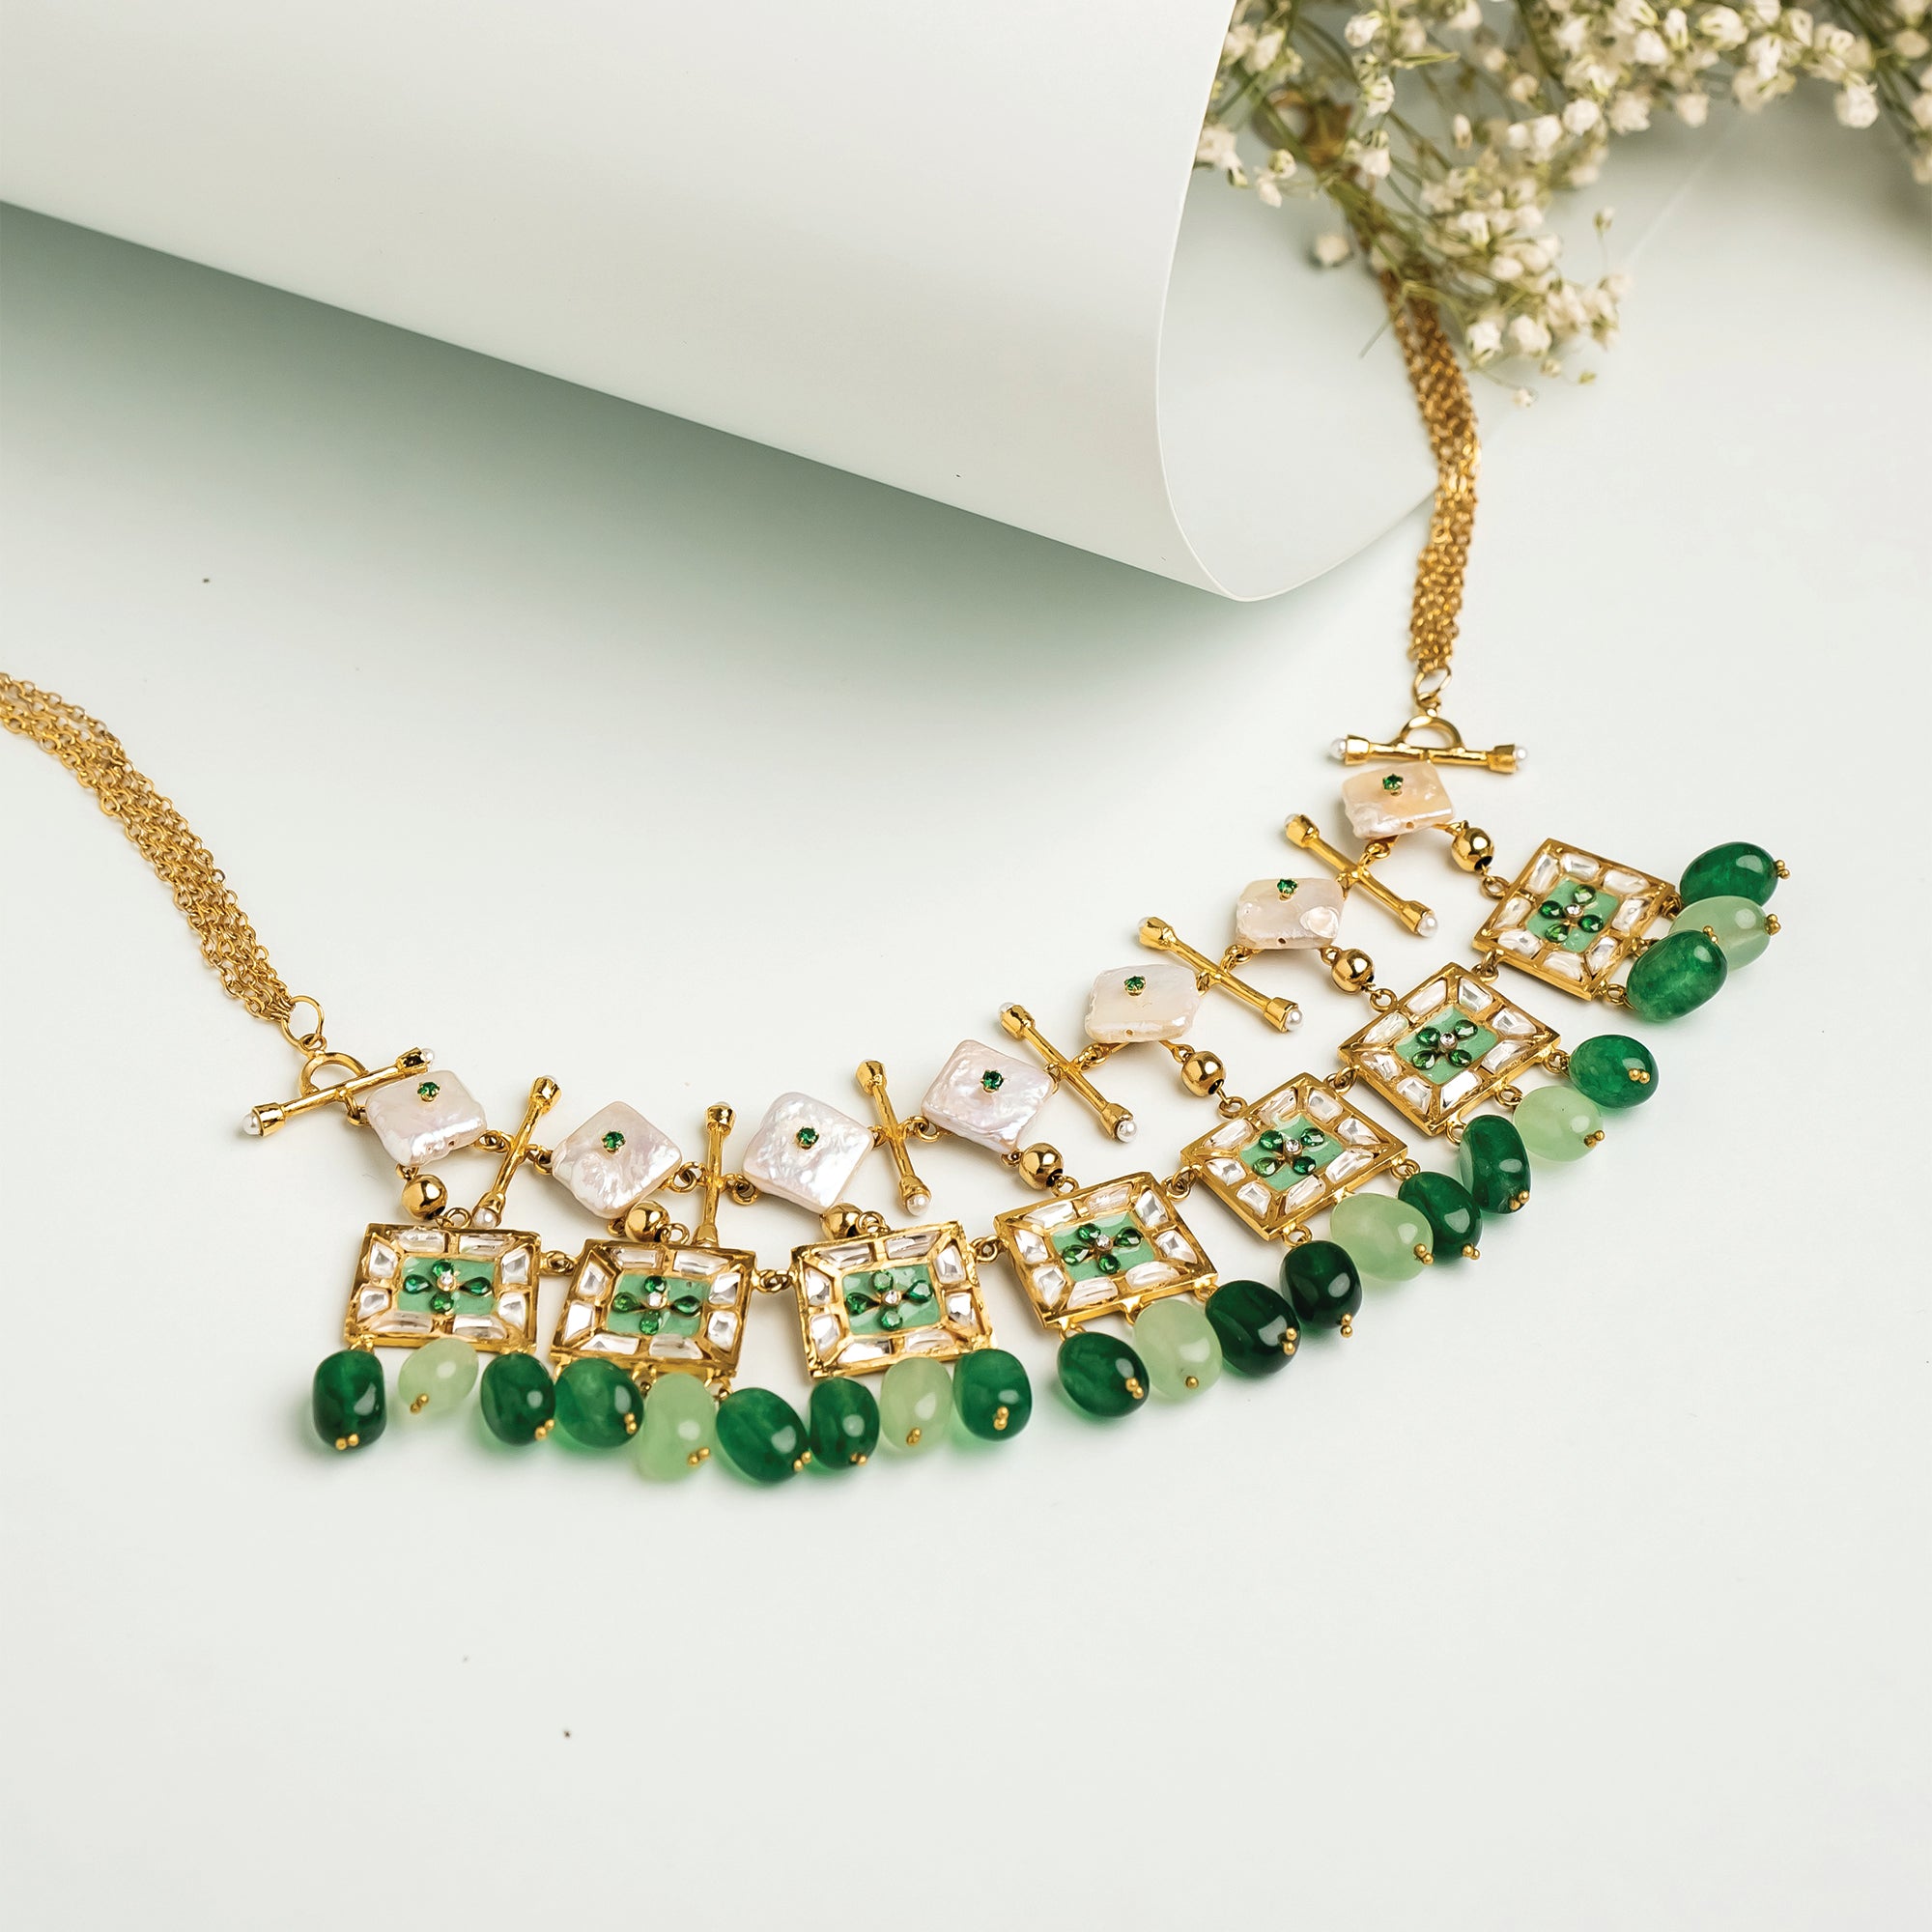 Dangling Greens Necklace